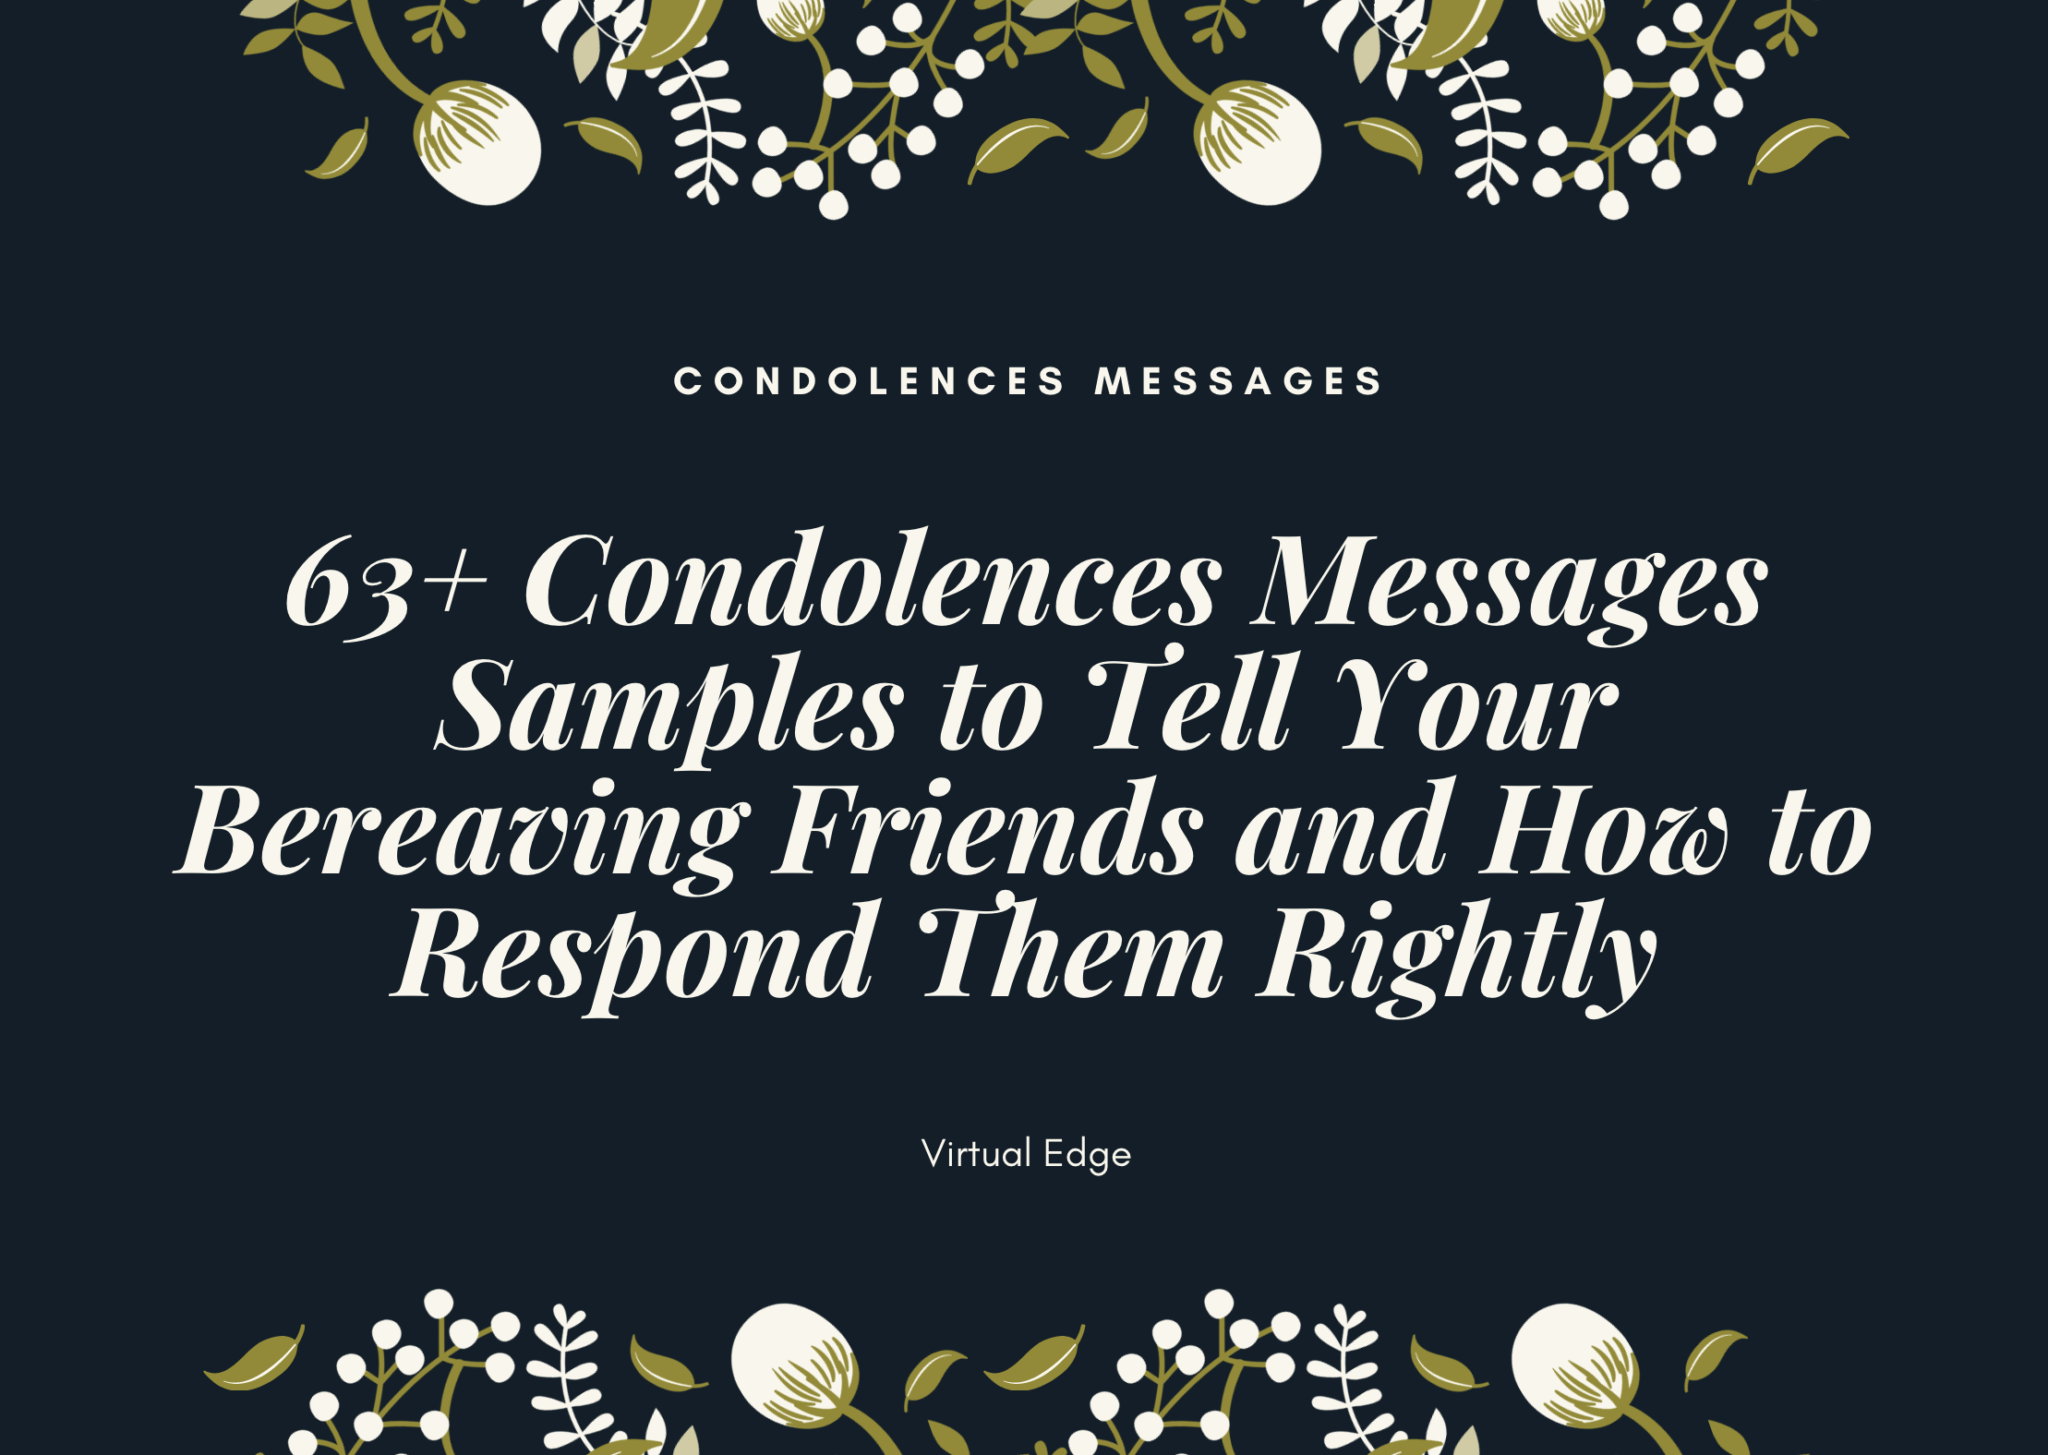 63+ Condolences Messages Samples to Tell Your Bereaving Friends and How